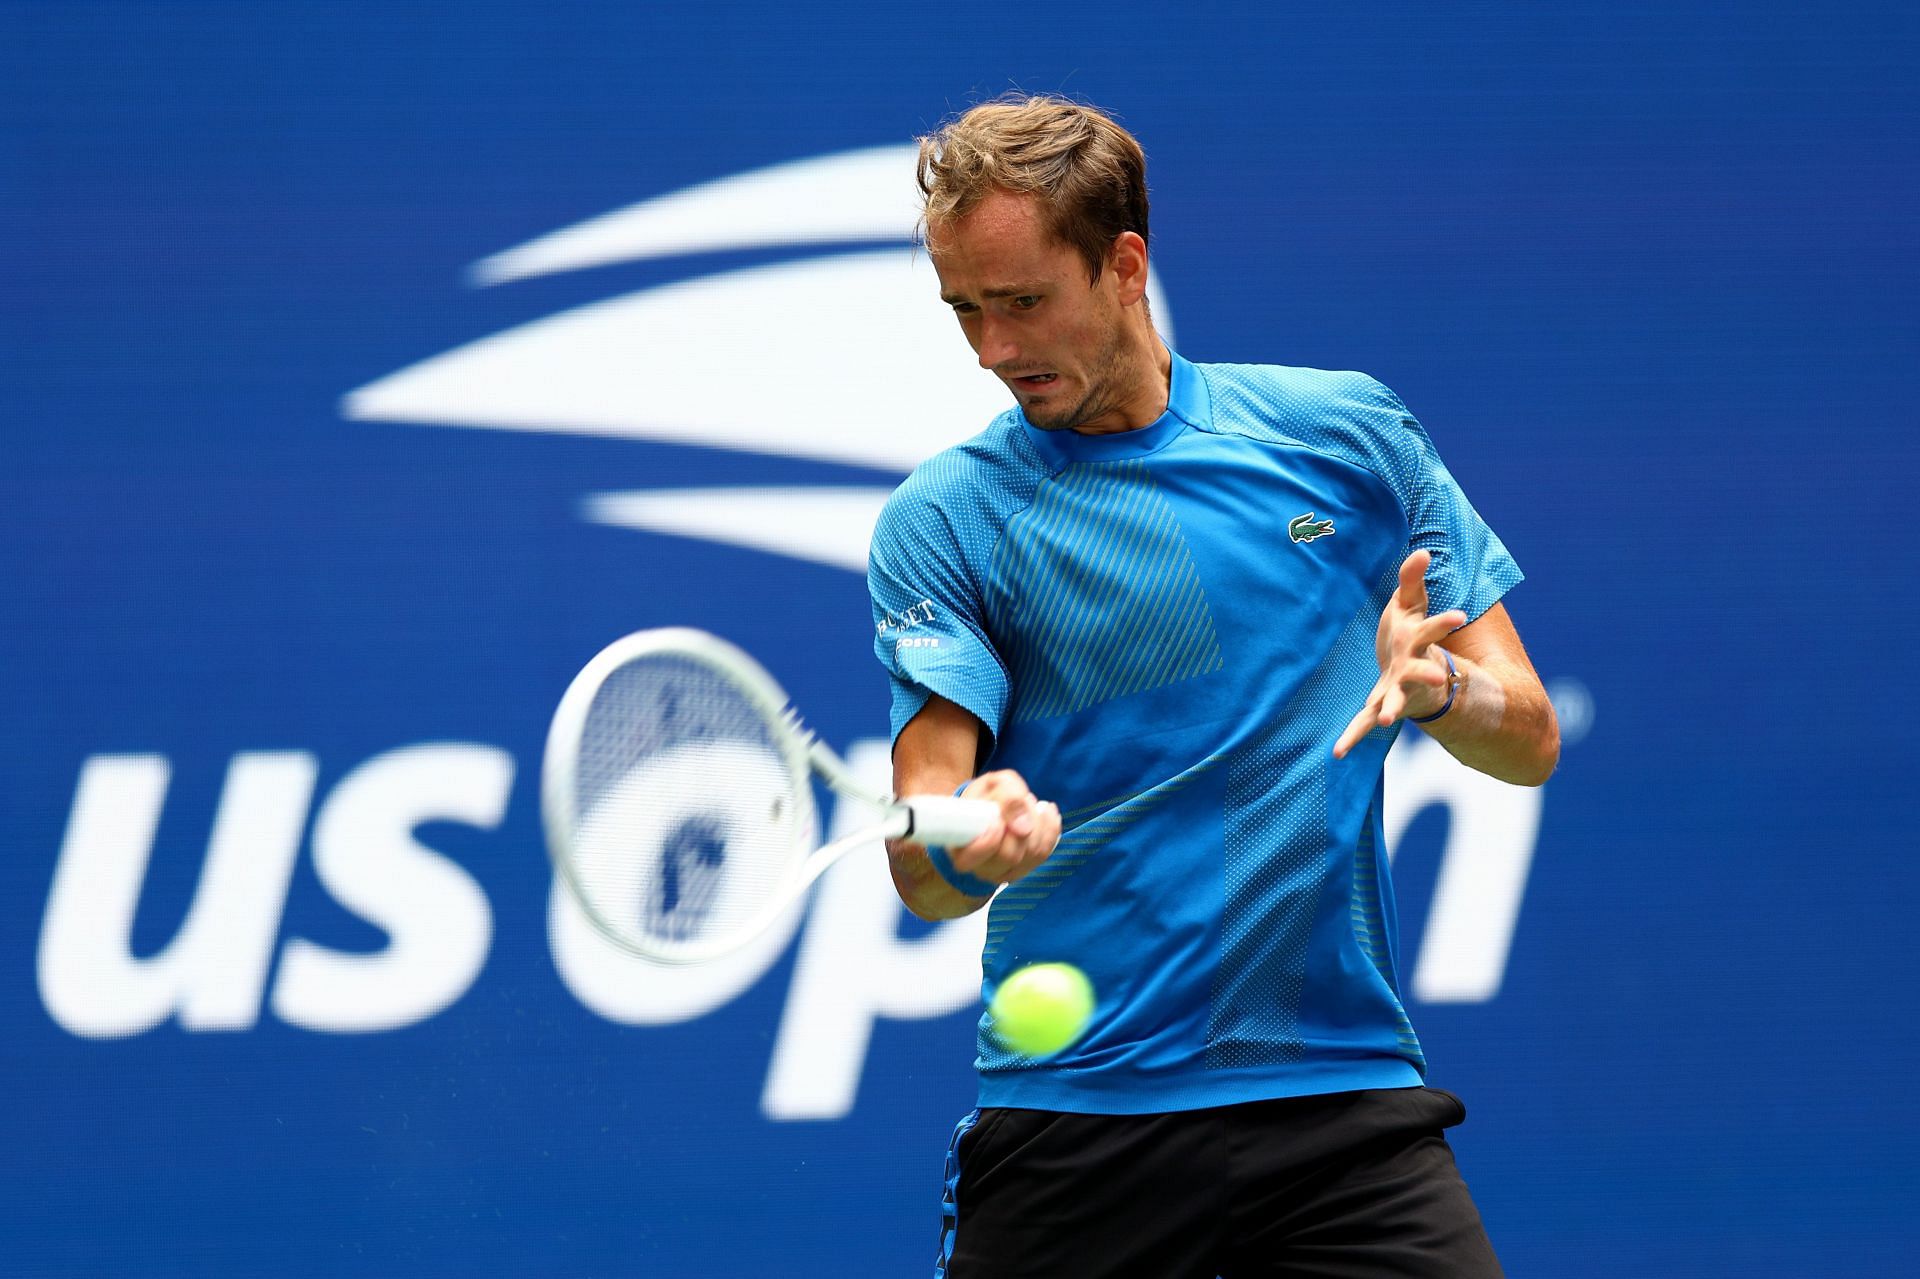 Danill Medvedev plays a forehand against Stefan Kozlov at the 2022 US Open - Day 1